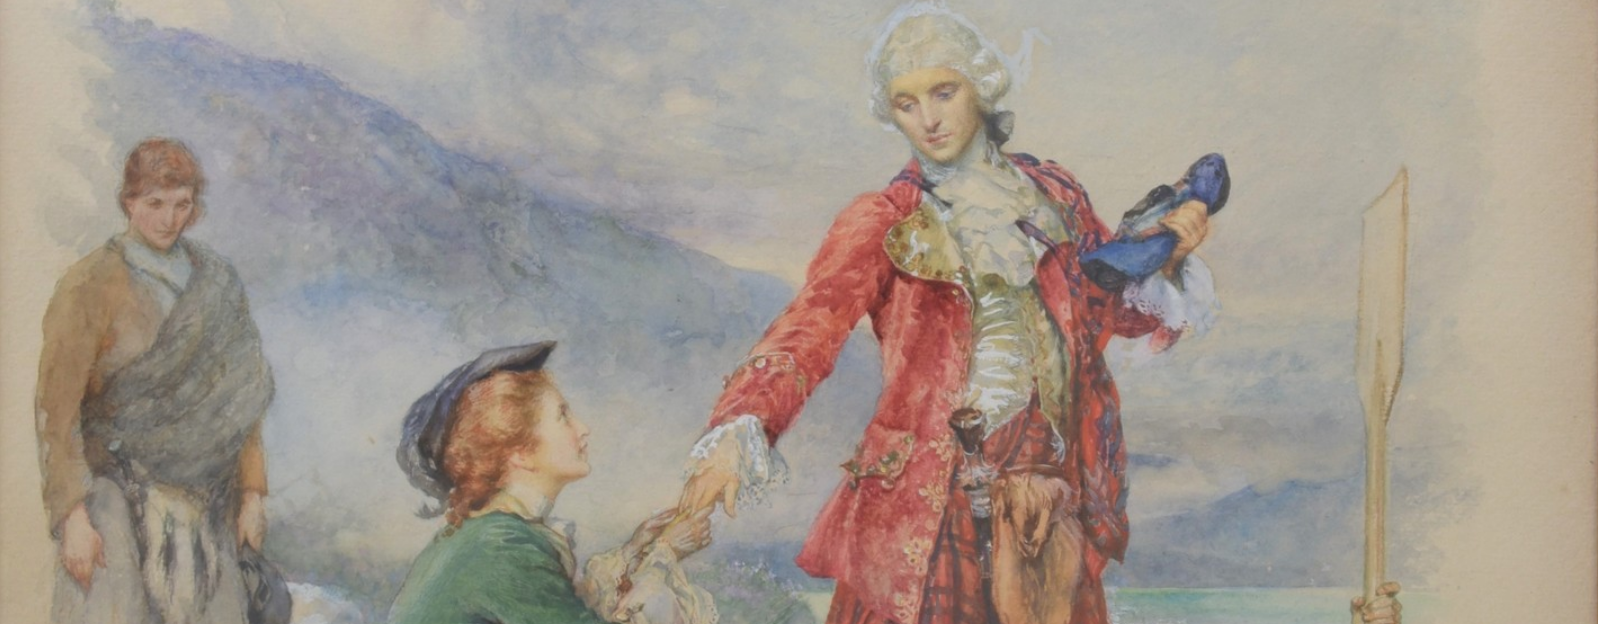 Painting of Bonnie Prince Charlie and Flora MacDonald